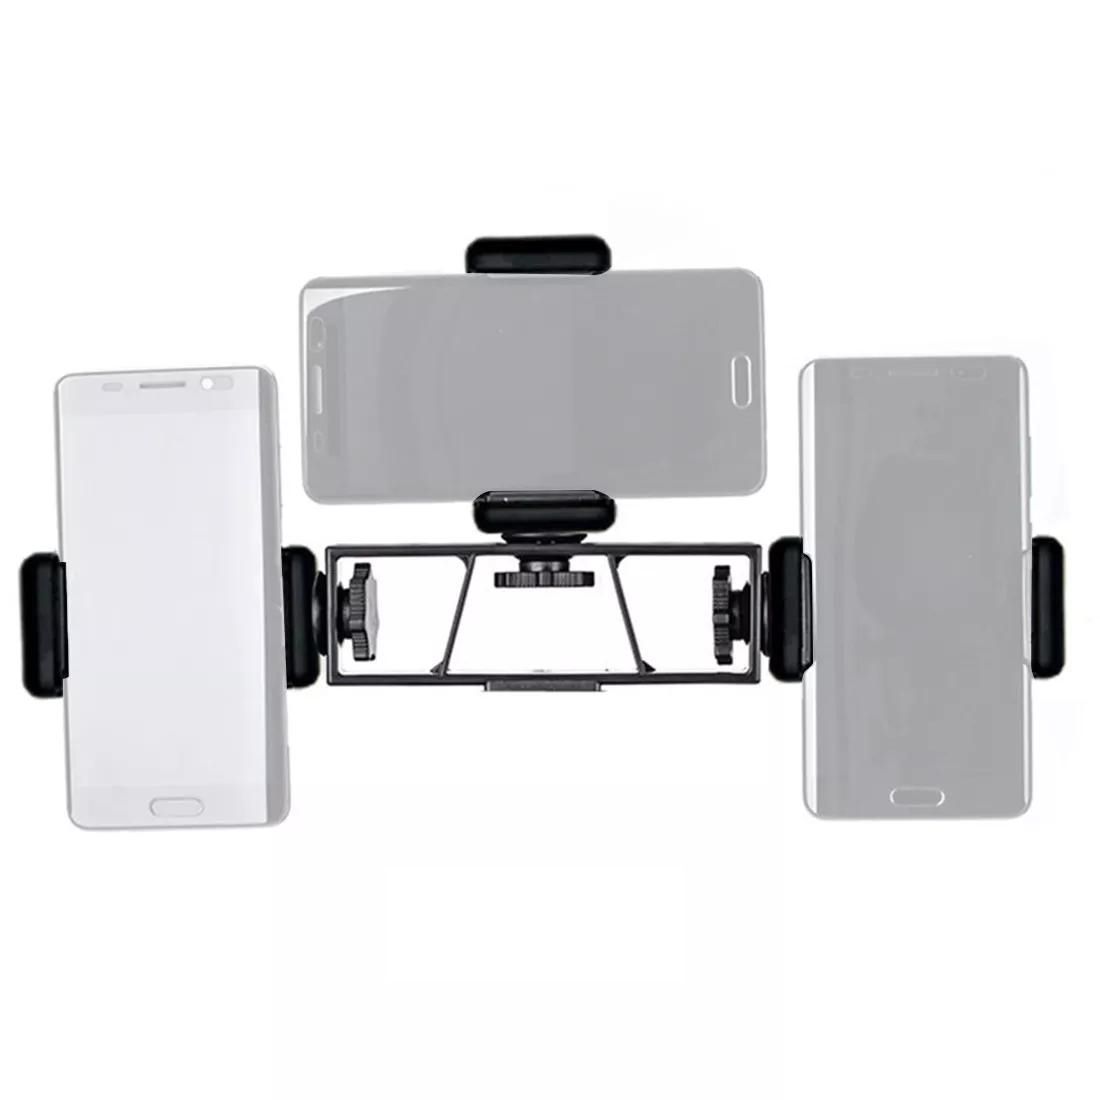 Three-position-Live-Broadcast-Mobile-Phone-Holder-Photography-Tripod-Accessory-Support-Mounting-3-Pc-1673457